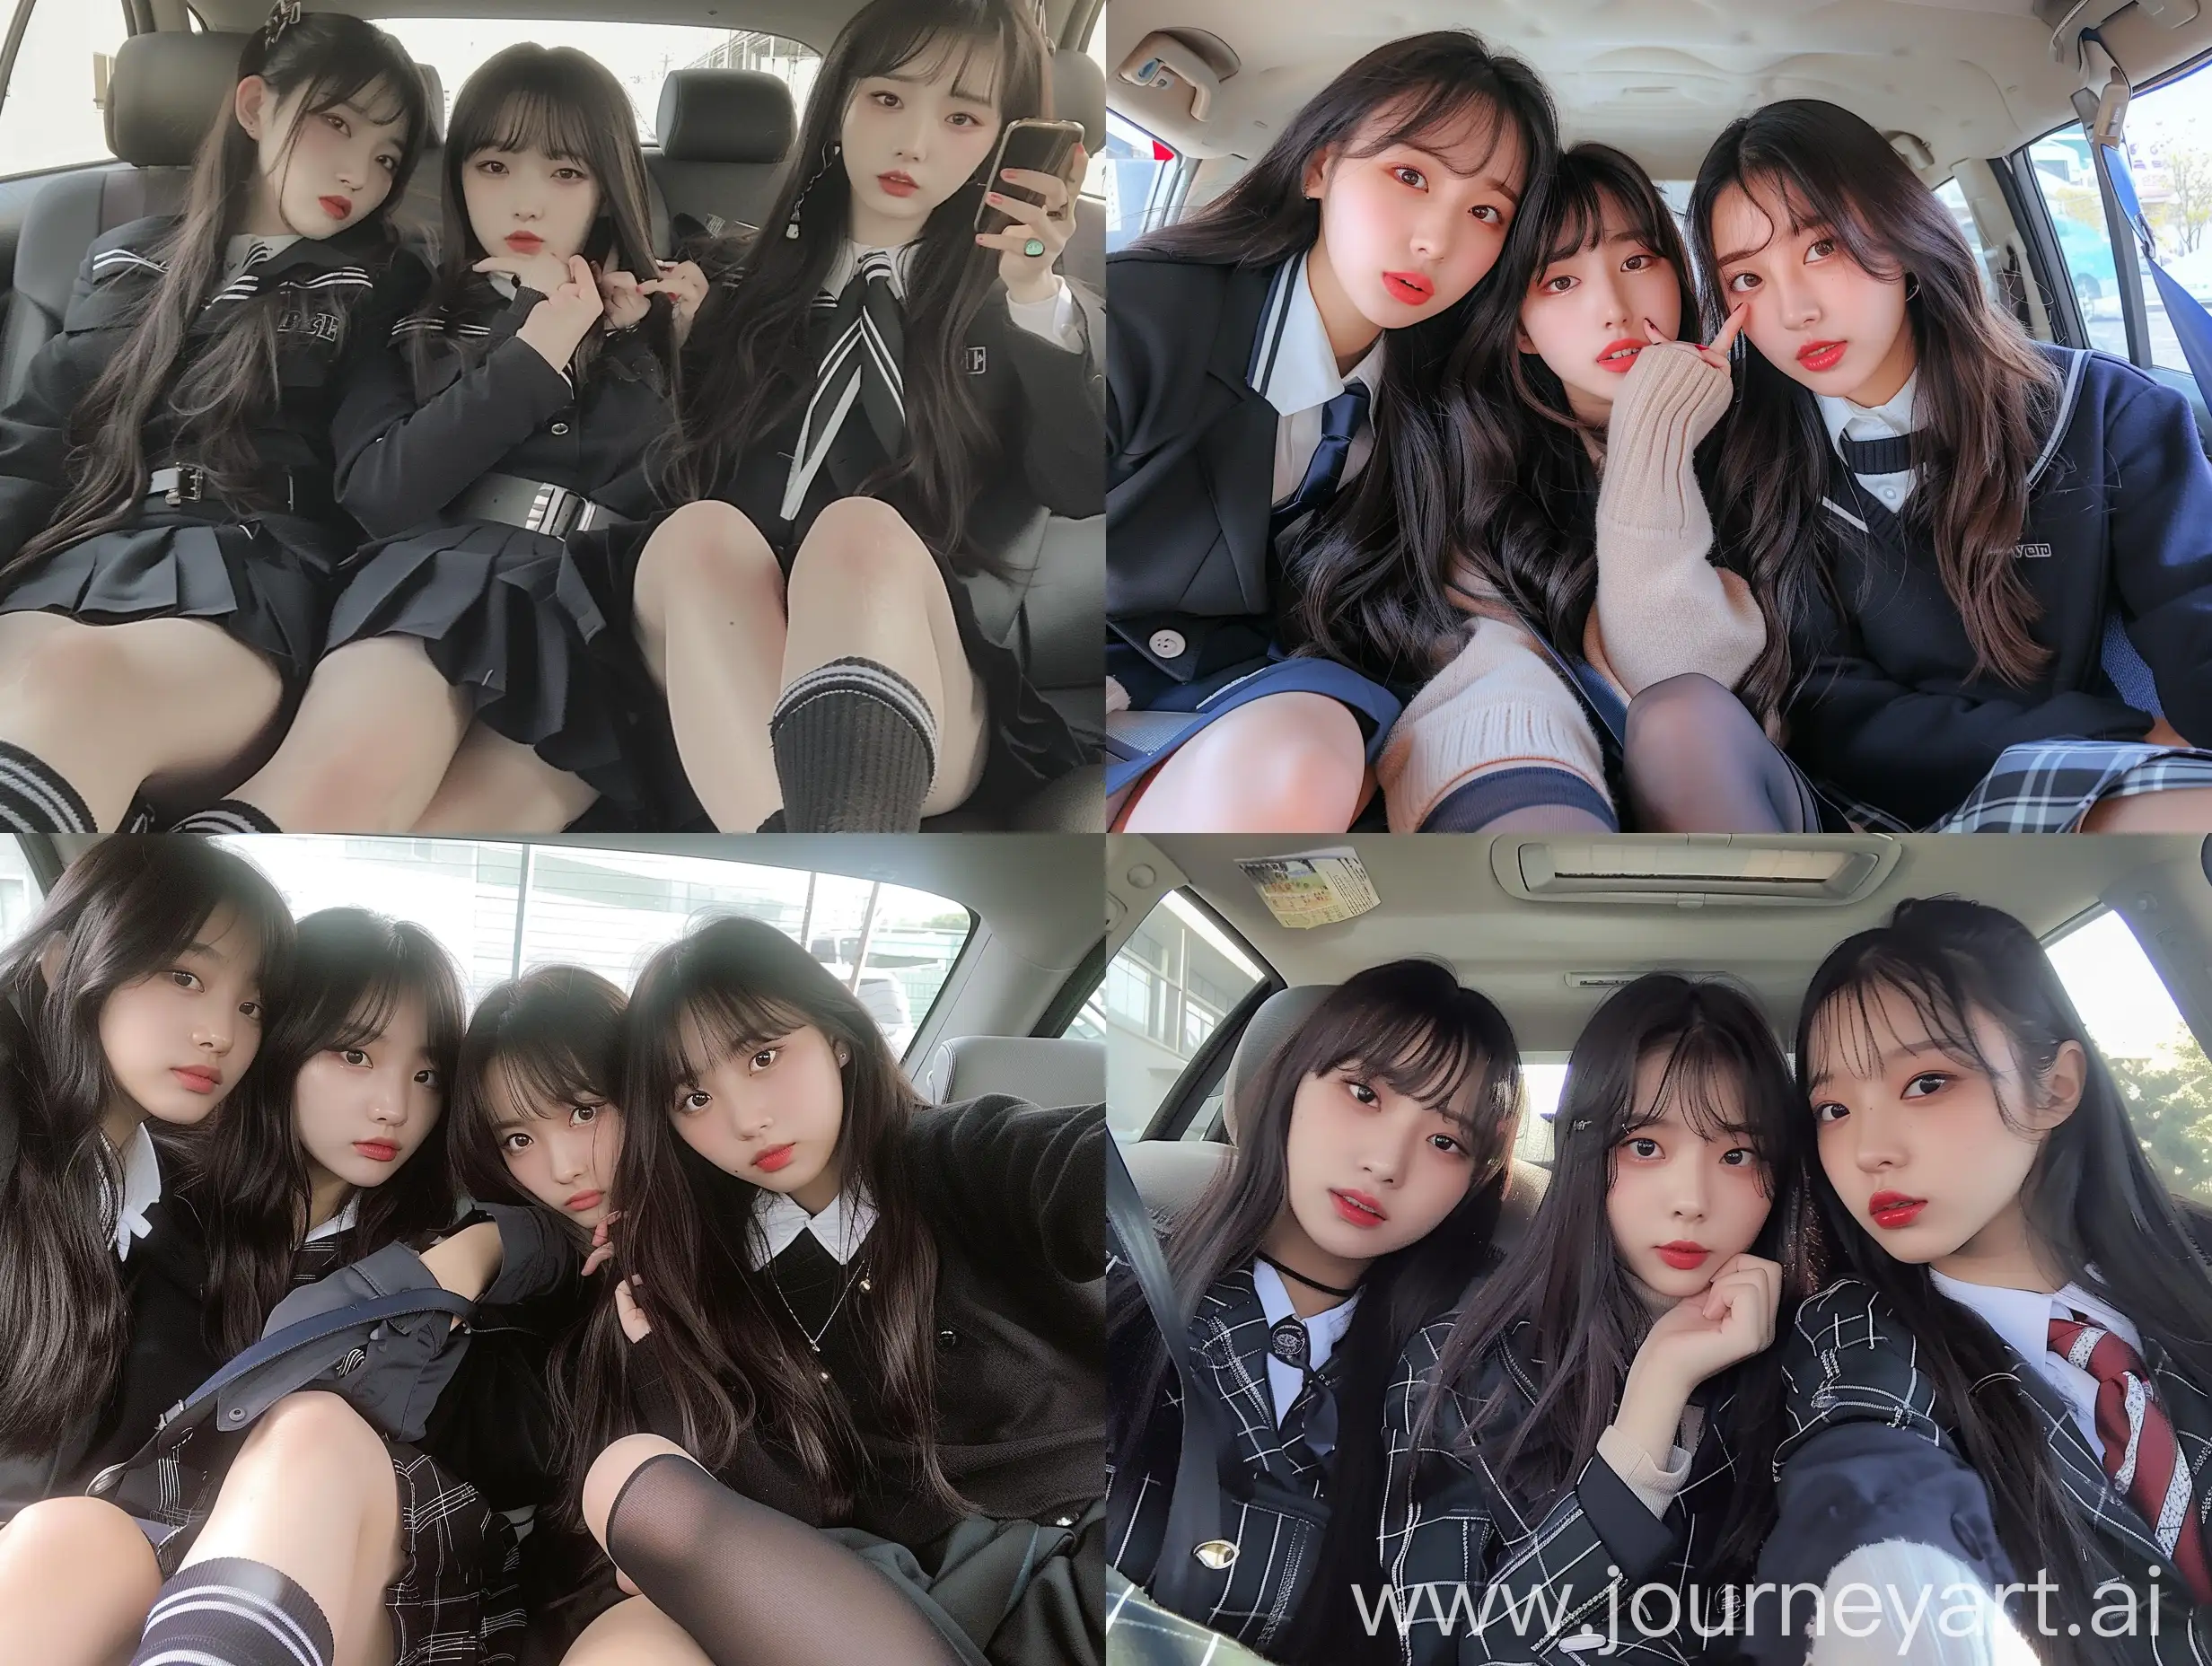 3 korean girls, long  hair ,bangs, fringed hair, 22 years old, inside car, influencer, beauty ,, black rbd school uniform, makeup,, sitting on car , fat legs,  socks and boots, no effect, selfie , iphone selfie, no filters , iphone photo natural